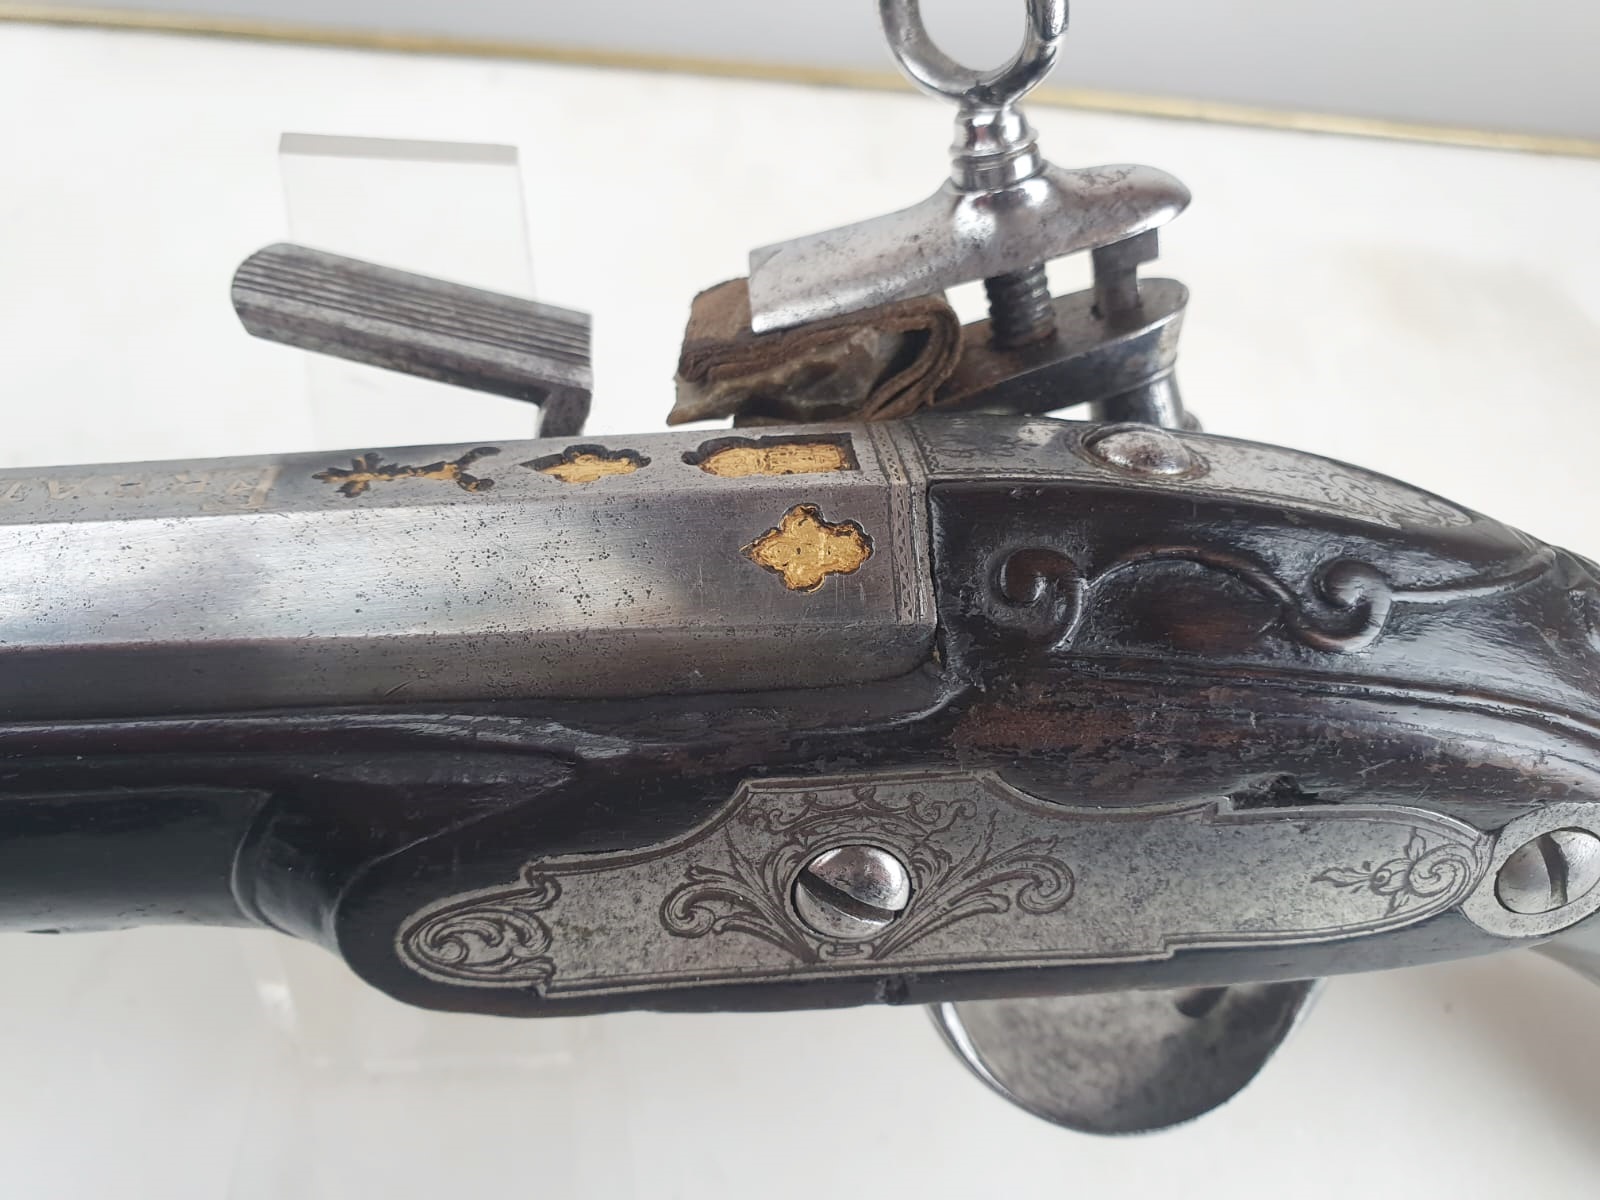 Spanish pistol, plate with gold punched miquelet